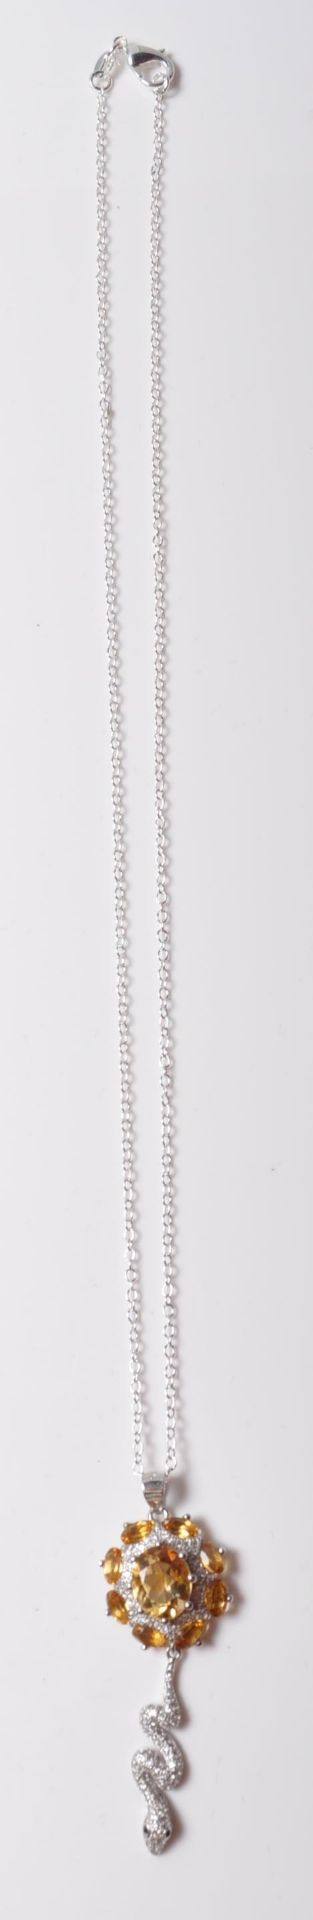 STAMPED 925 SILVER SNAKEDROP NECKLACE SET WITH YELLOW STONES AND CZ'S. - Image 3 of 8